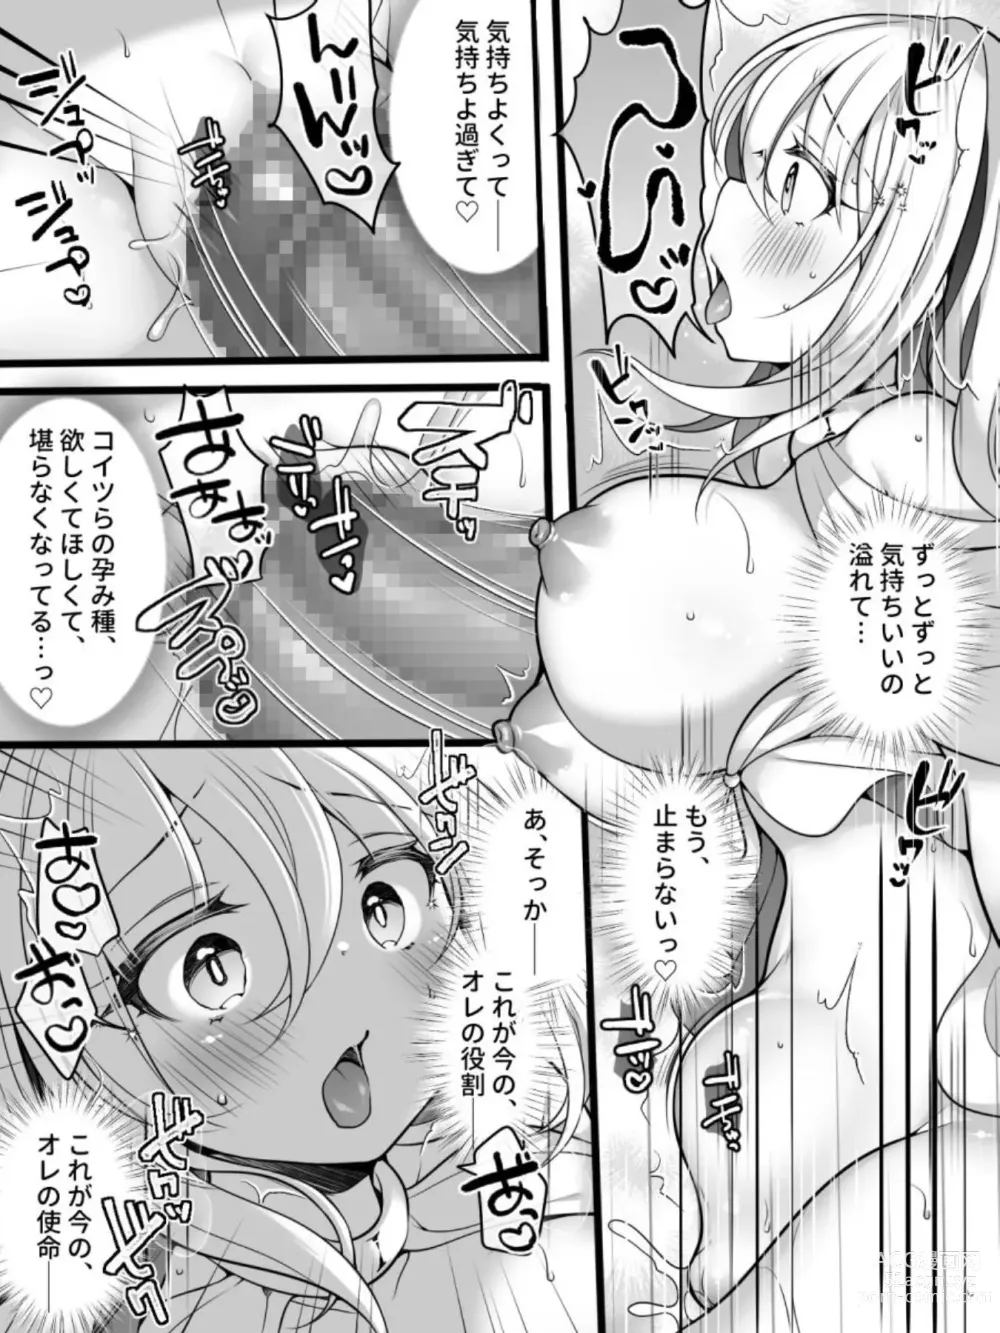 Page 29 of doujinshi TS Impregnated Princess ~A story about a former hero who becomes the princess of a group of orcs~